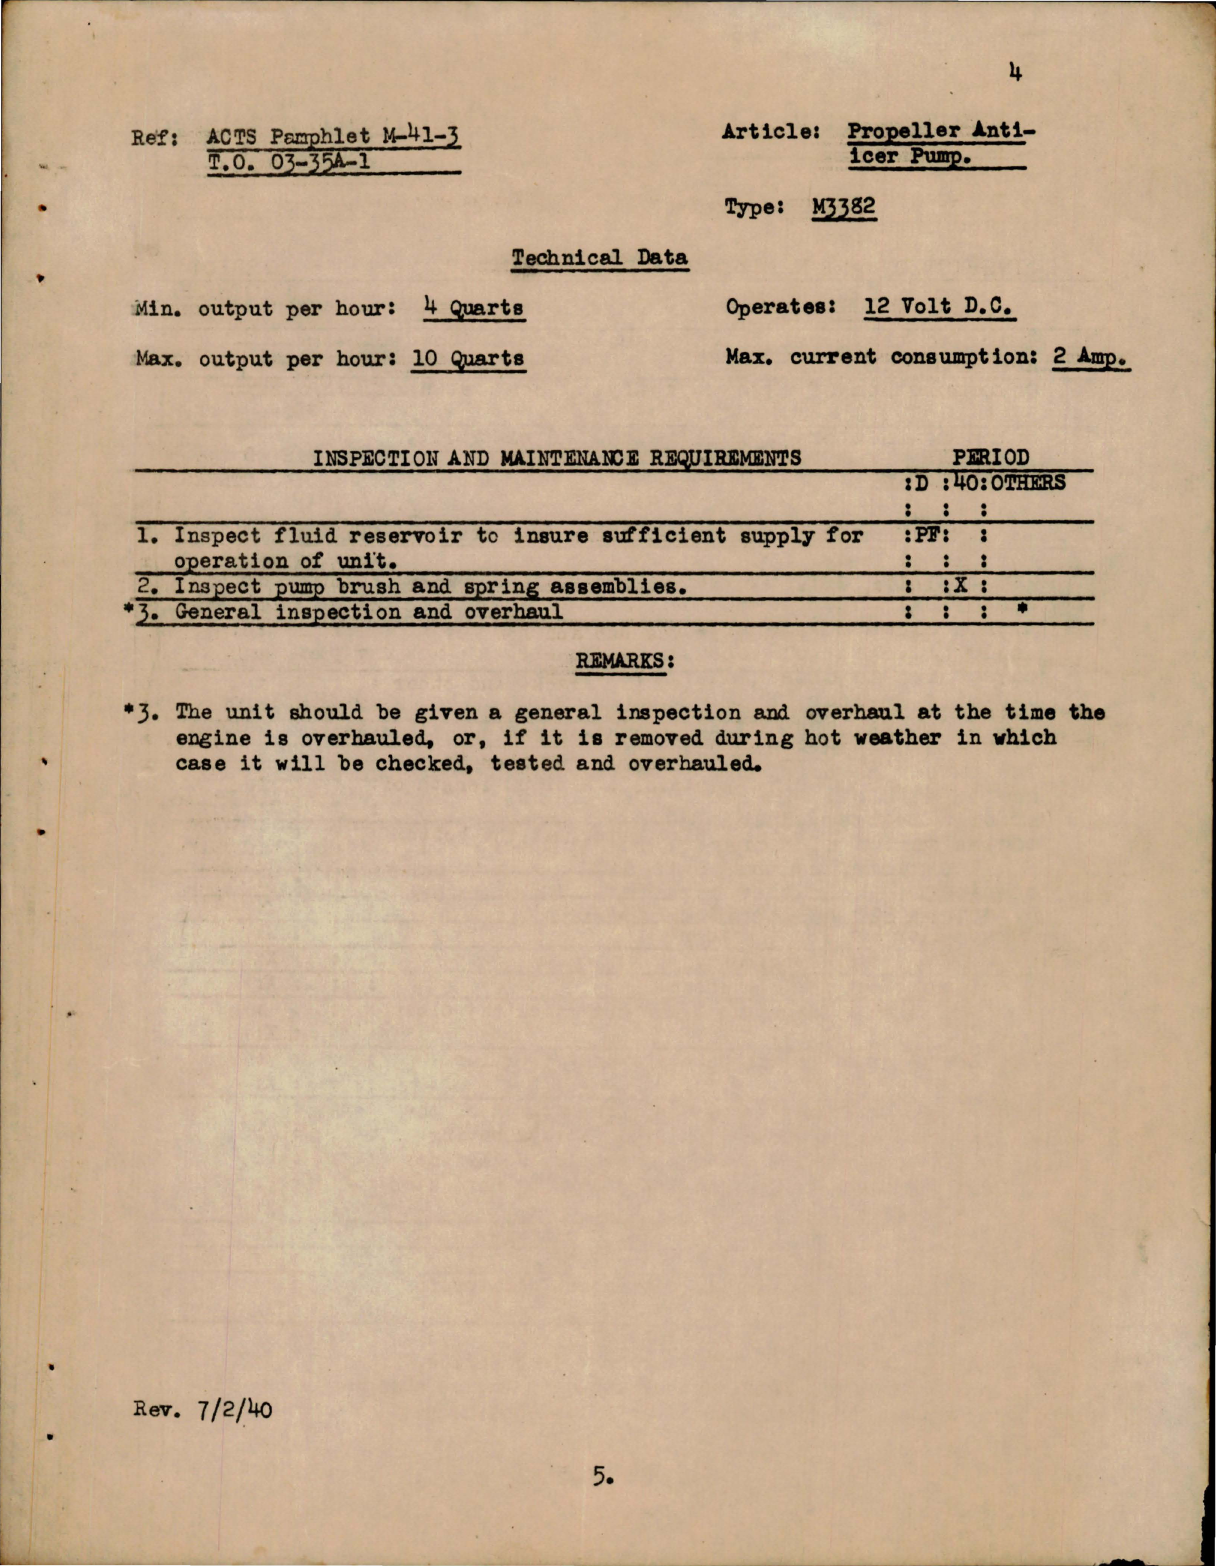 Sample page 5 from AirCorps Library document: Inspection and Maintenance Guide for Aircraft Propellers